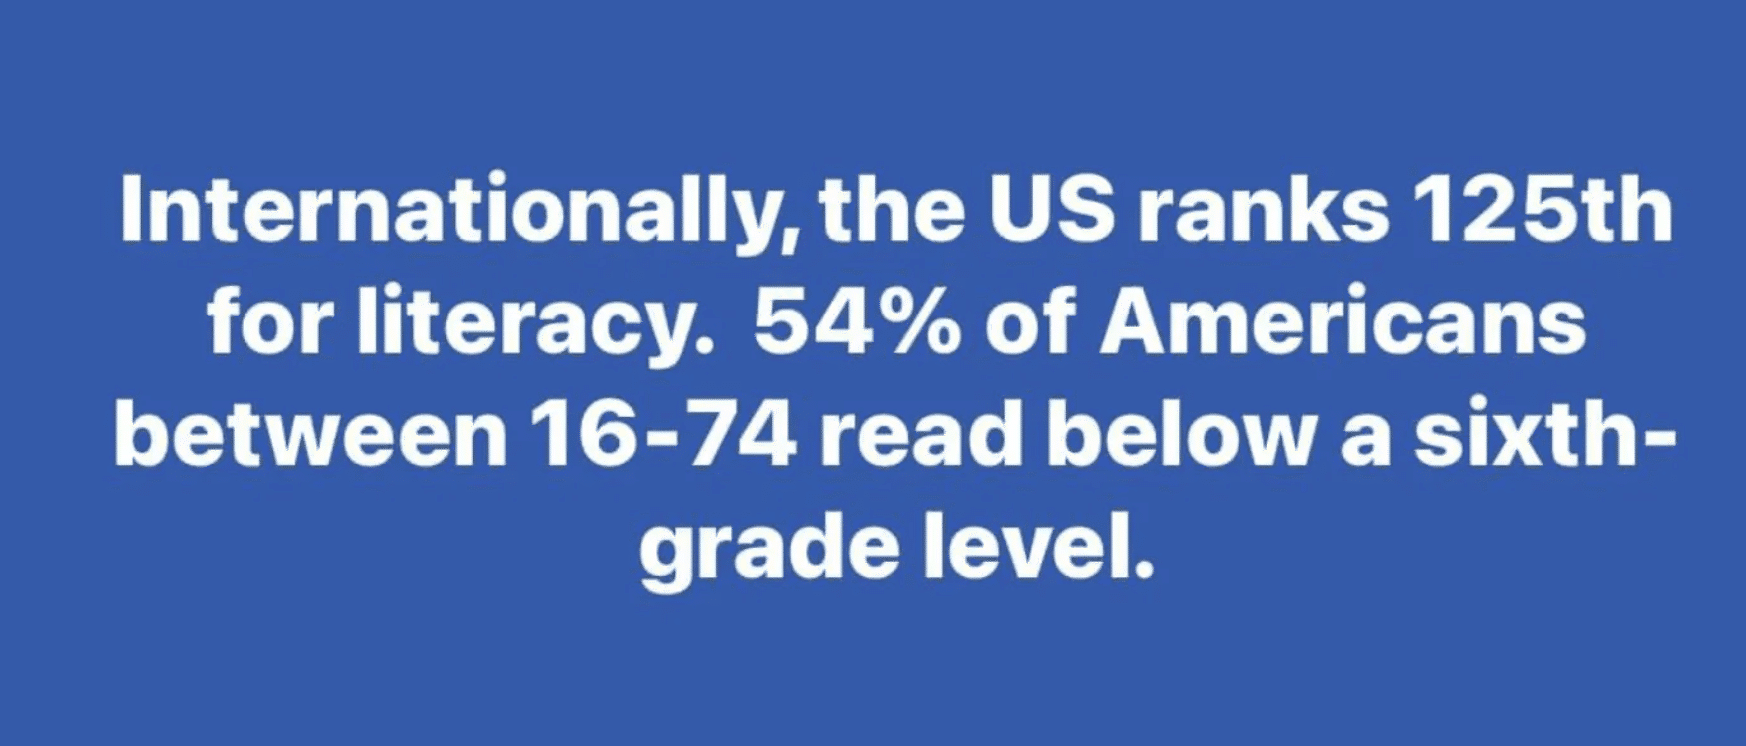 image shows statistic that states 54% of Americans between the ages of 16-74 read below a sixth-grade level